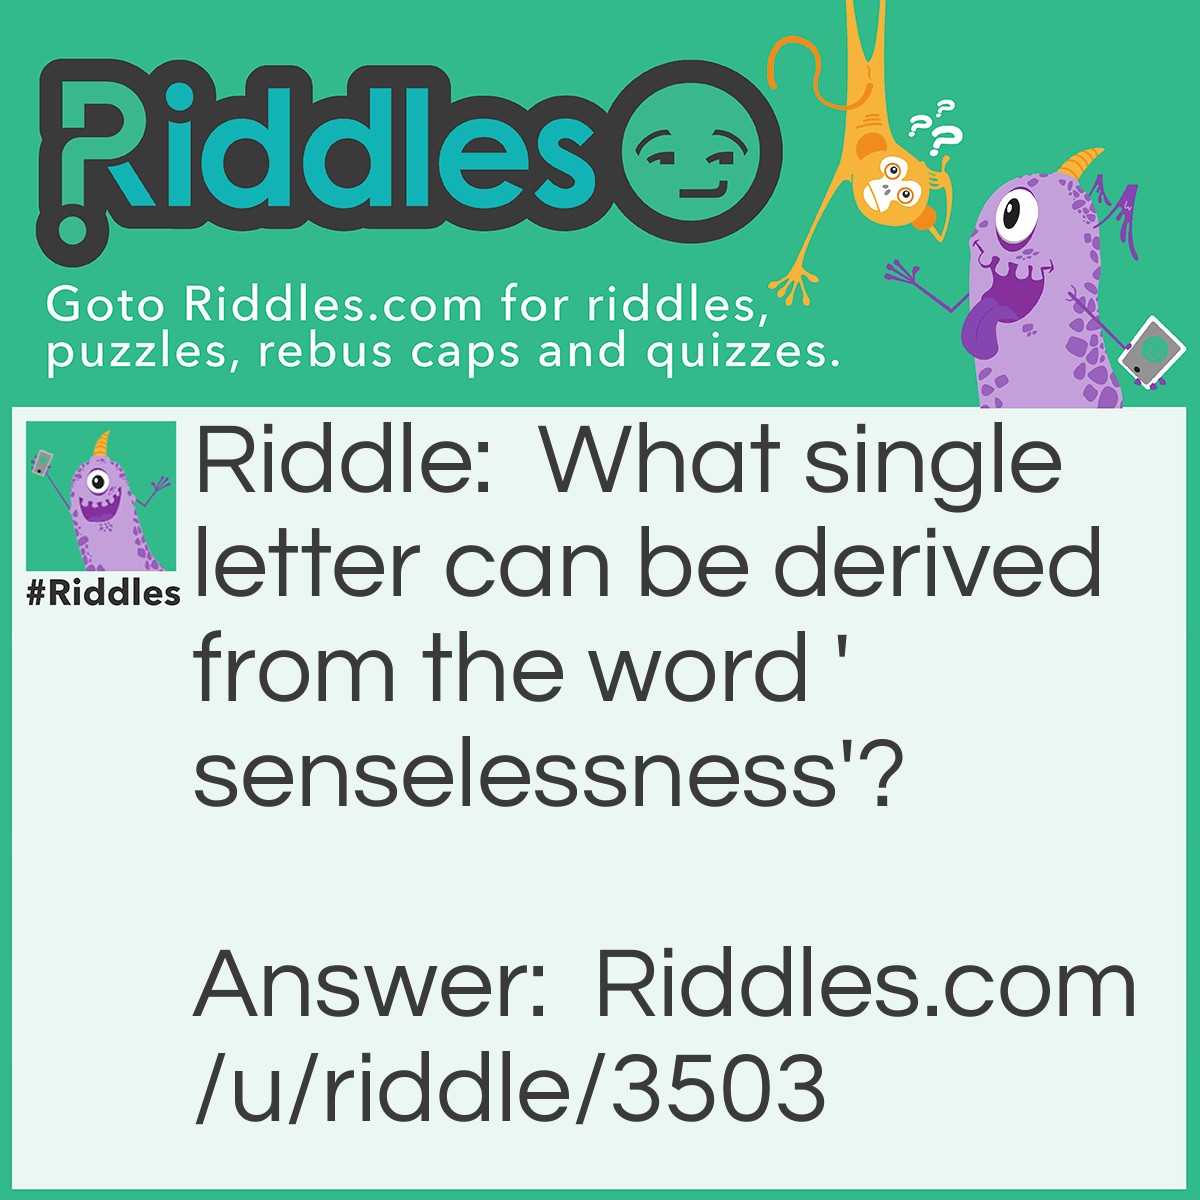 Riddle: What single letter can be derived from the word 'senselessness'? Answer: The letter E. If you break the word into three parts you get sense+less+ness. What letter remains when you remove 'ness' from 'sense'? 'E'!